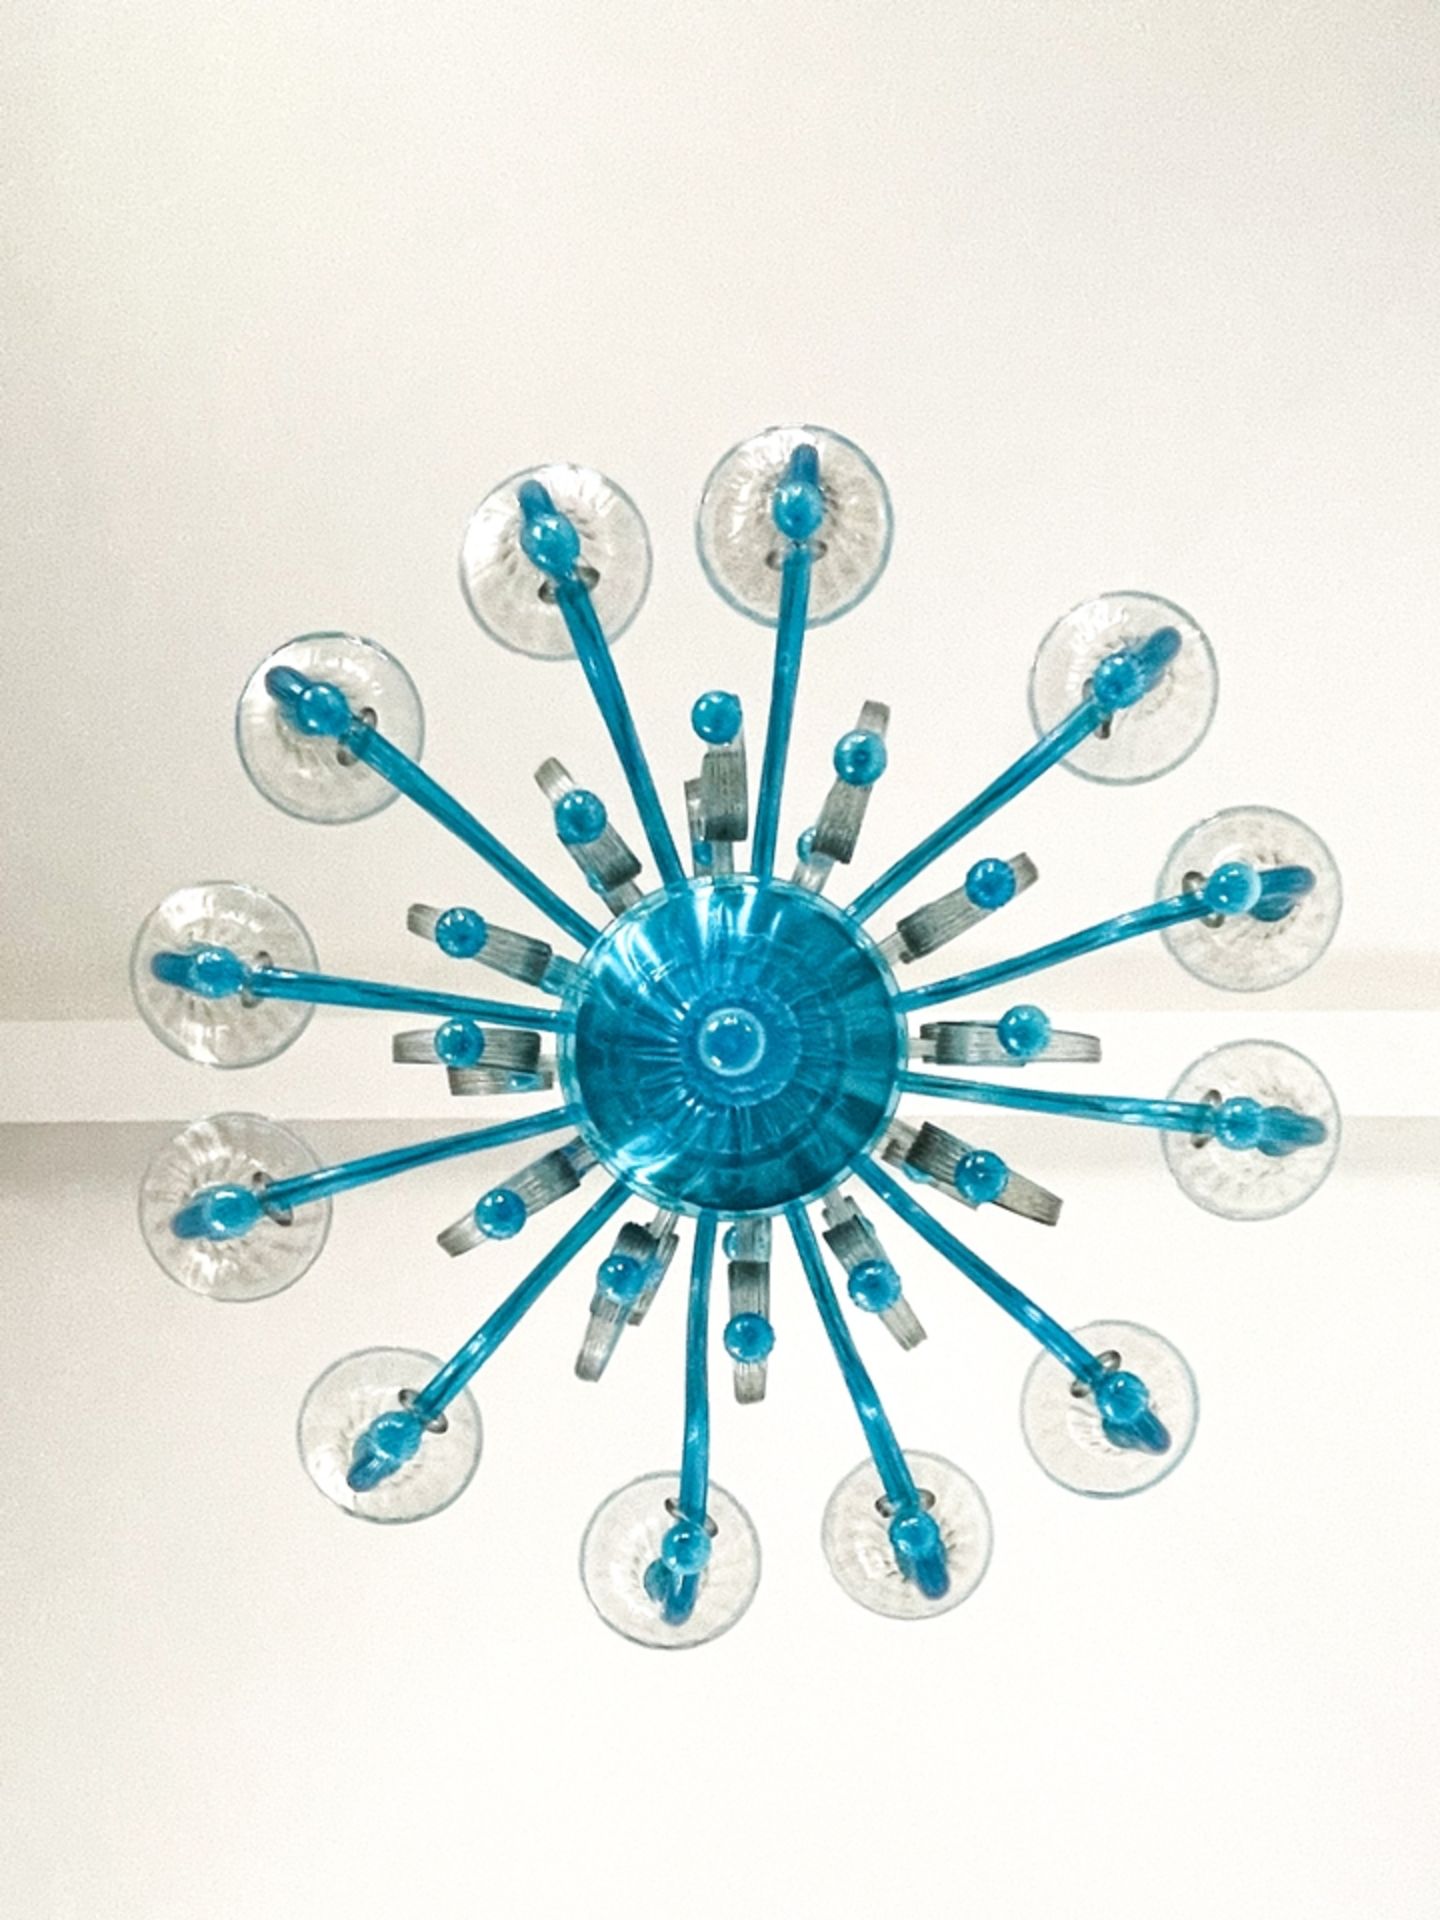 Monumental blur Murano chandelier / 1 of 2, - Image 5 of 5